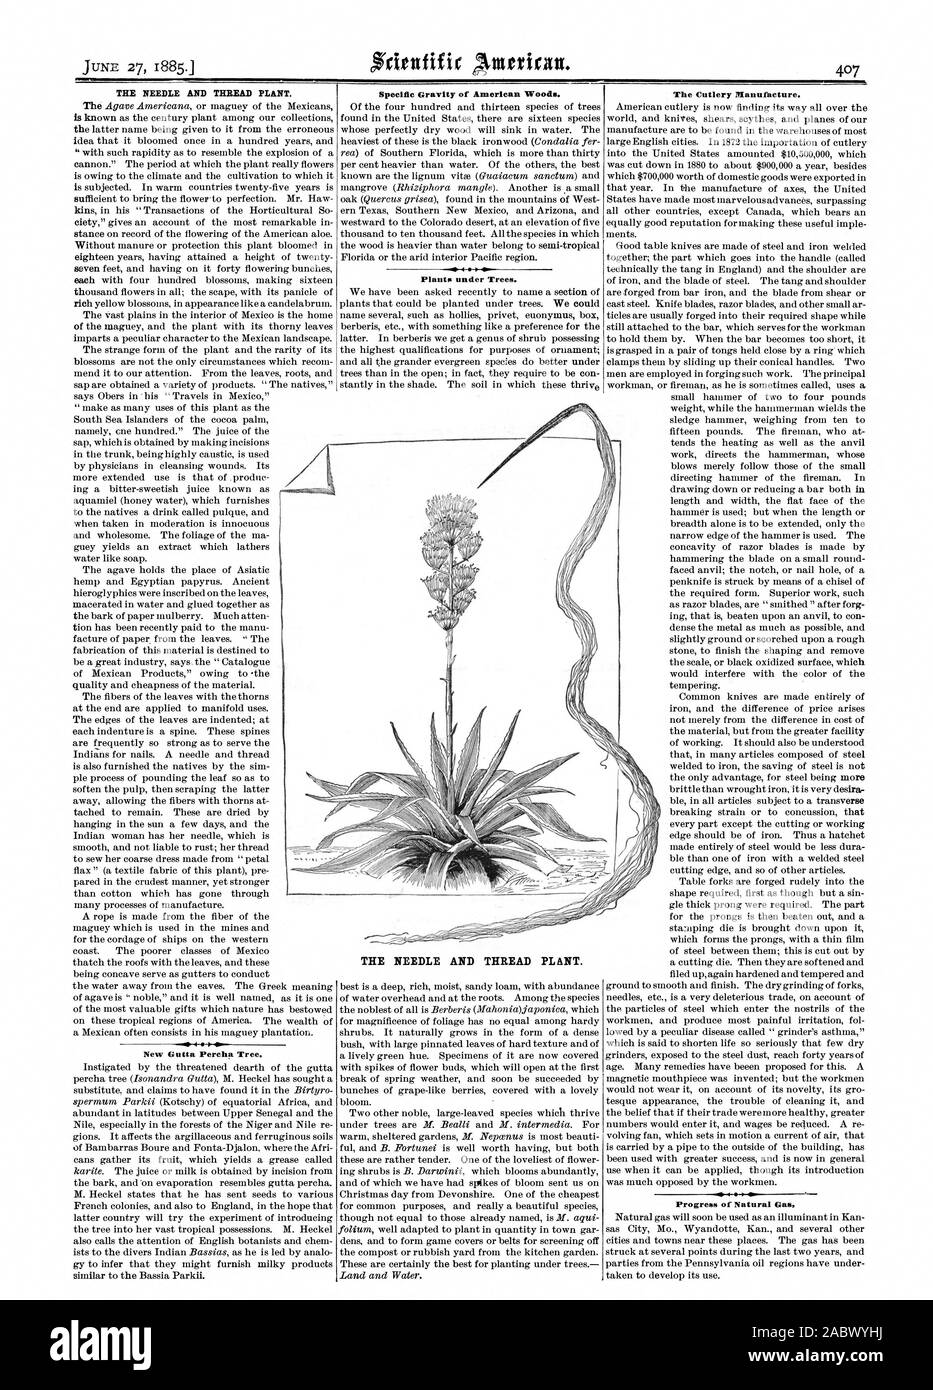 THE NEEDLE AND THREAD PLANT. New Gutta Percha Tree. Specific Gravity of American Woods. Plant. under Trees. The Cutlery Manufacture. Progress of Natural Gas. THE NEEDLE AND THREAD PLANT., scientific american, 1885-06-27 Stock Photo